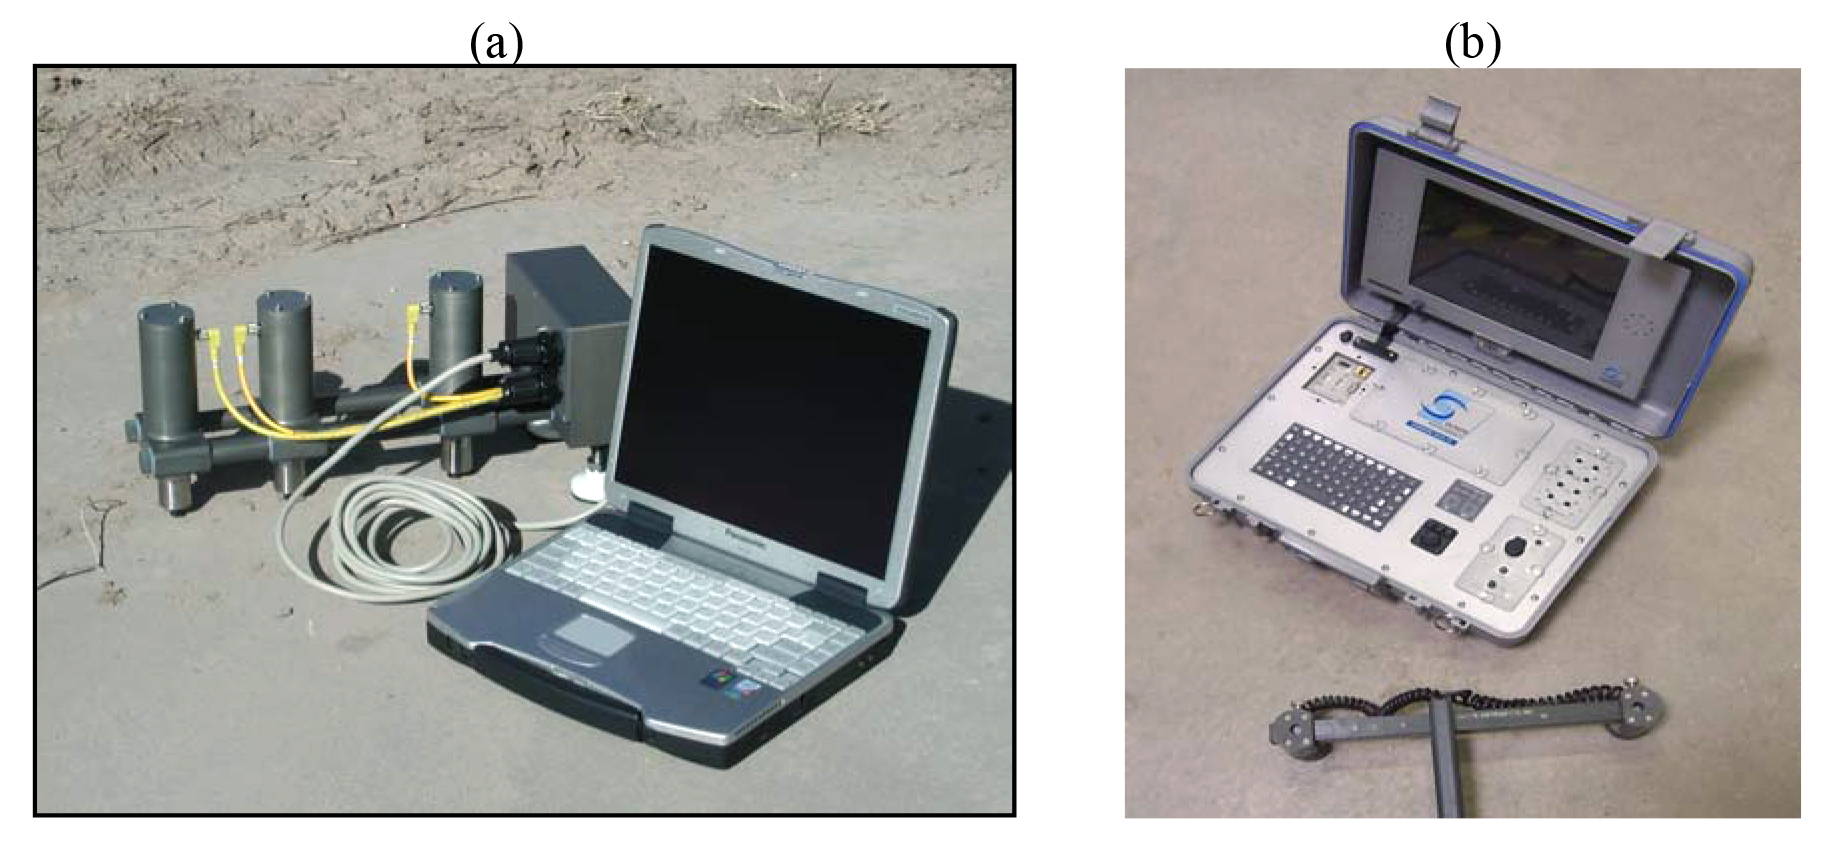 Spectral Analysis of Surface Waves 
		Instruments (a) Portable Seismic Property Analyzer (PSPA) by Geomedia Research and Development, 
		(b) SASW 1-S by Olson Instruments, Inc.